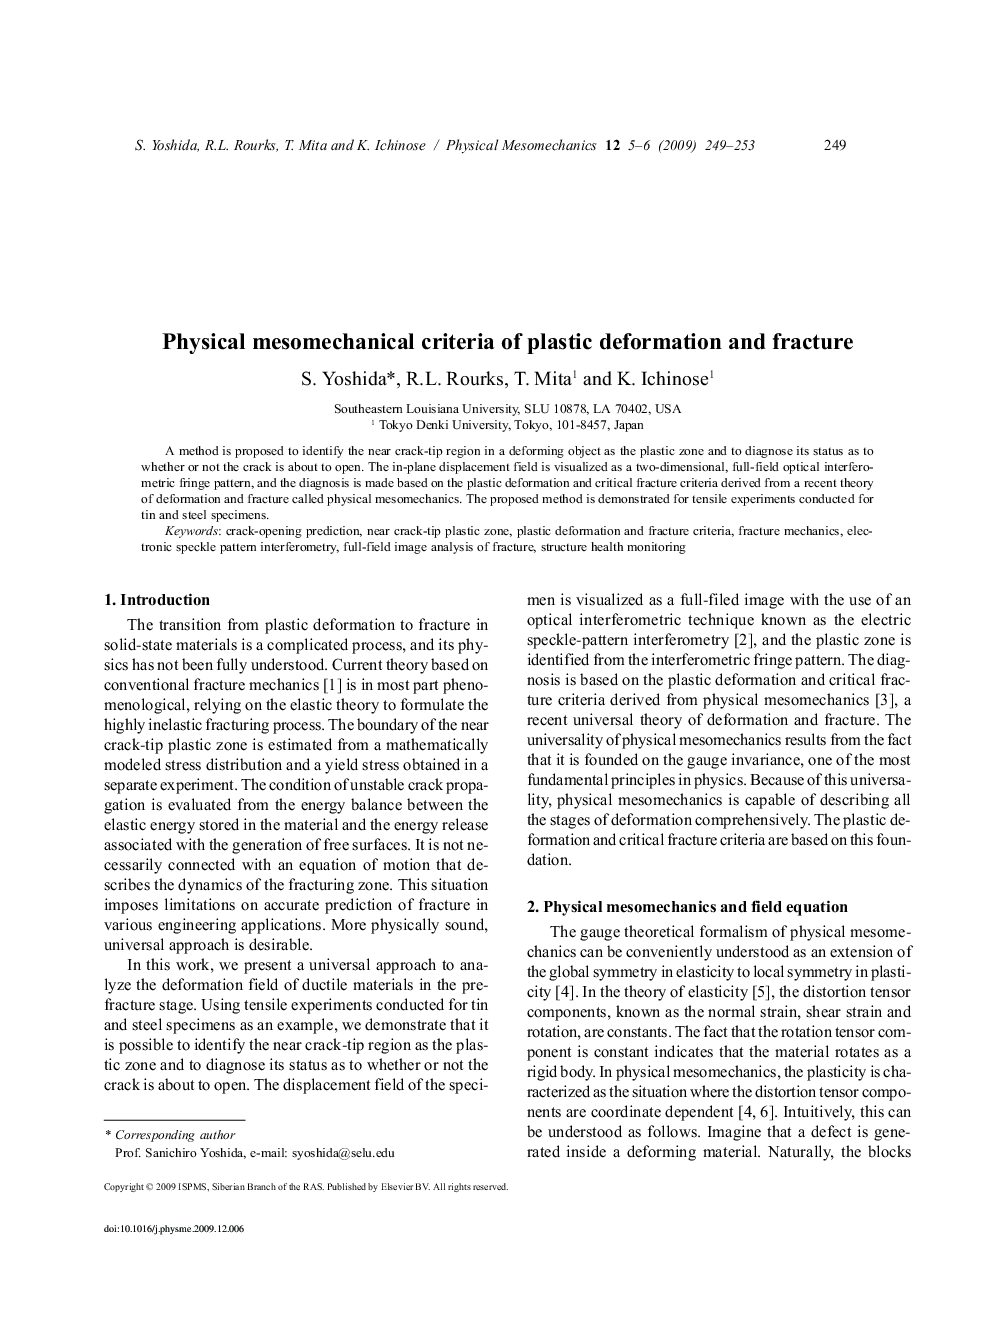 Physical mesomechanical criteria of plastic deformation and fracture